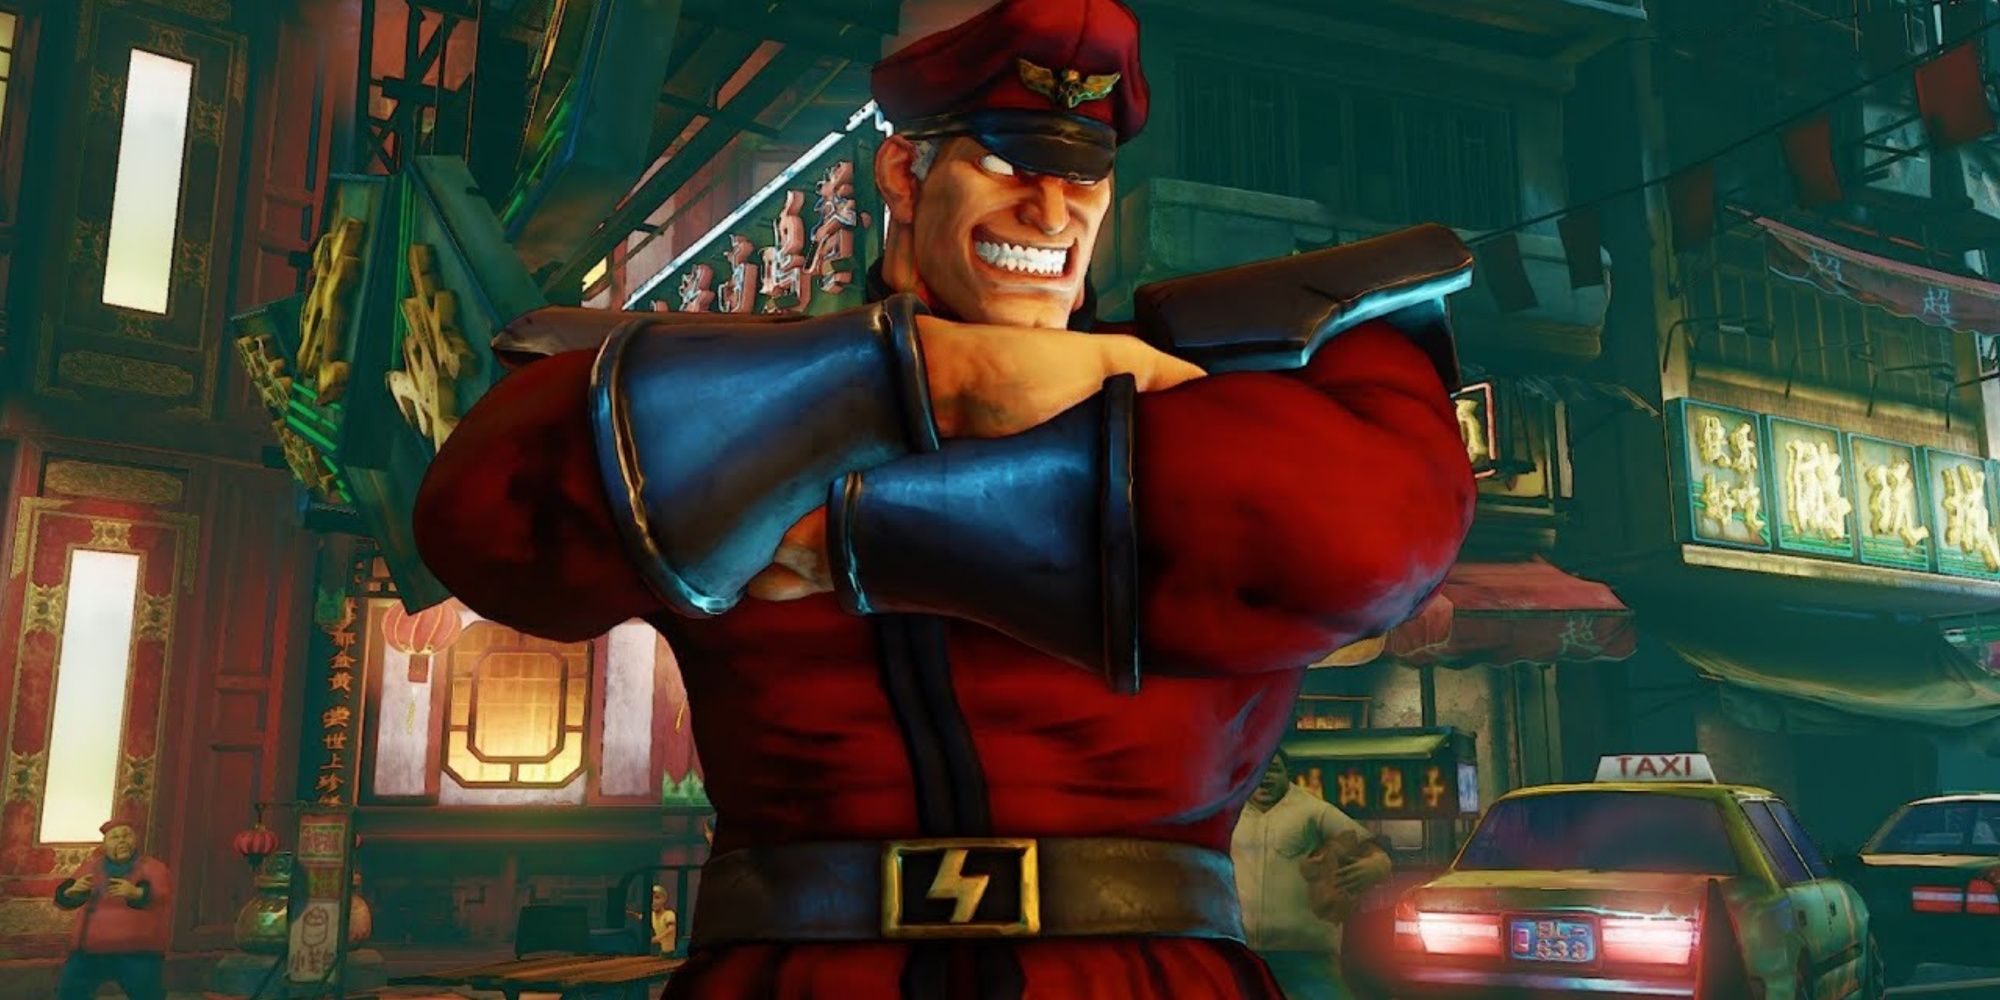 M Bison from Street Fighter 5